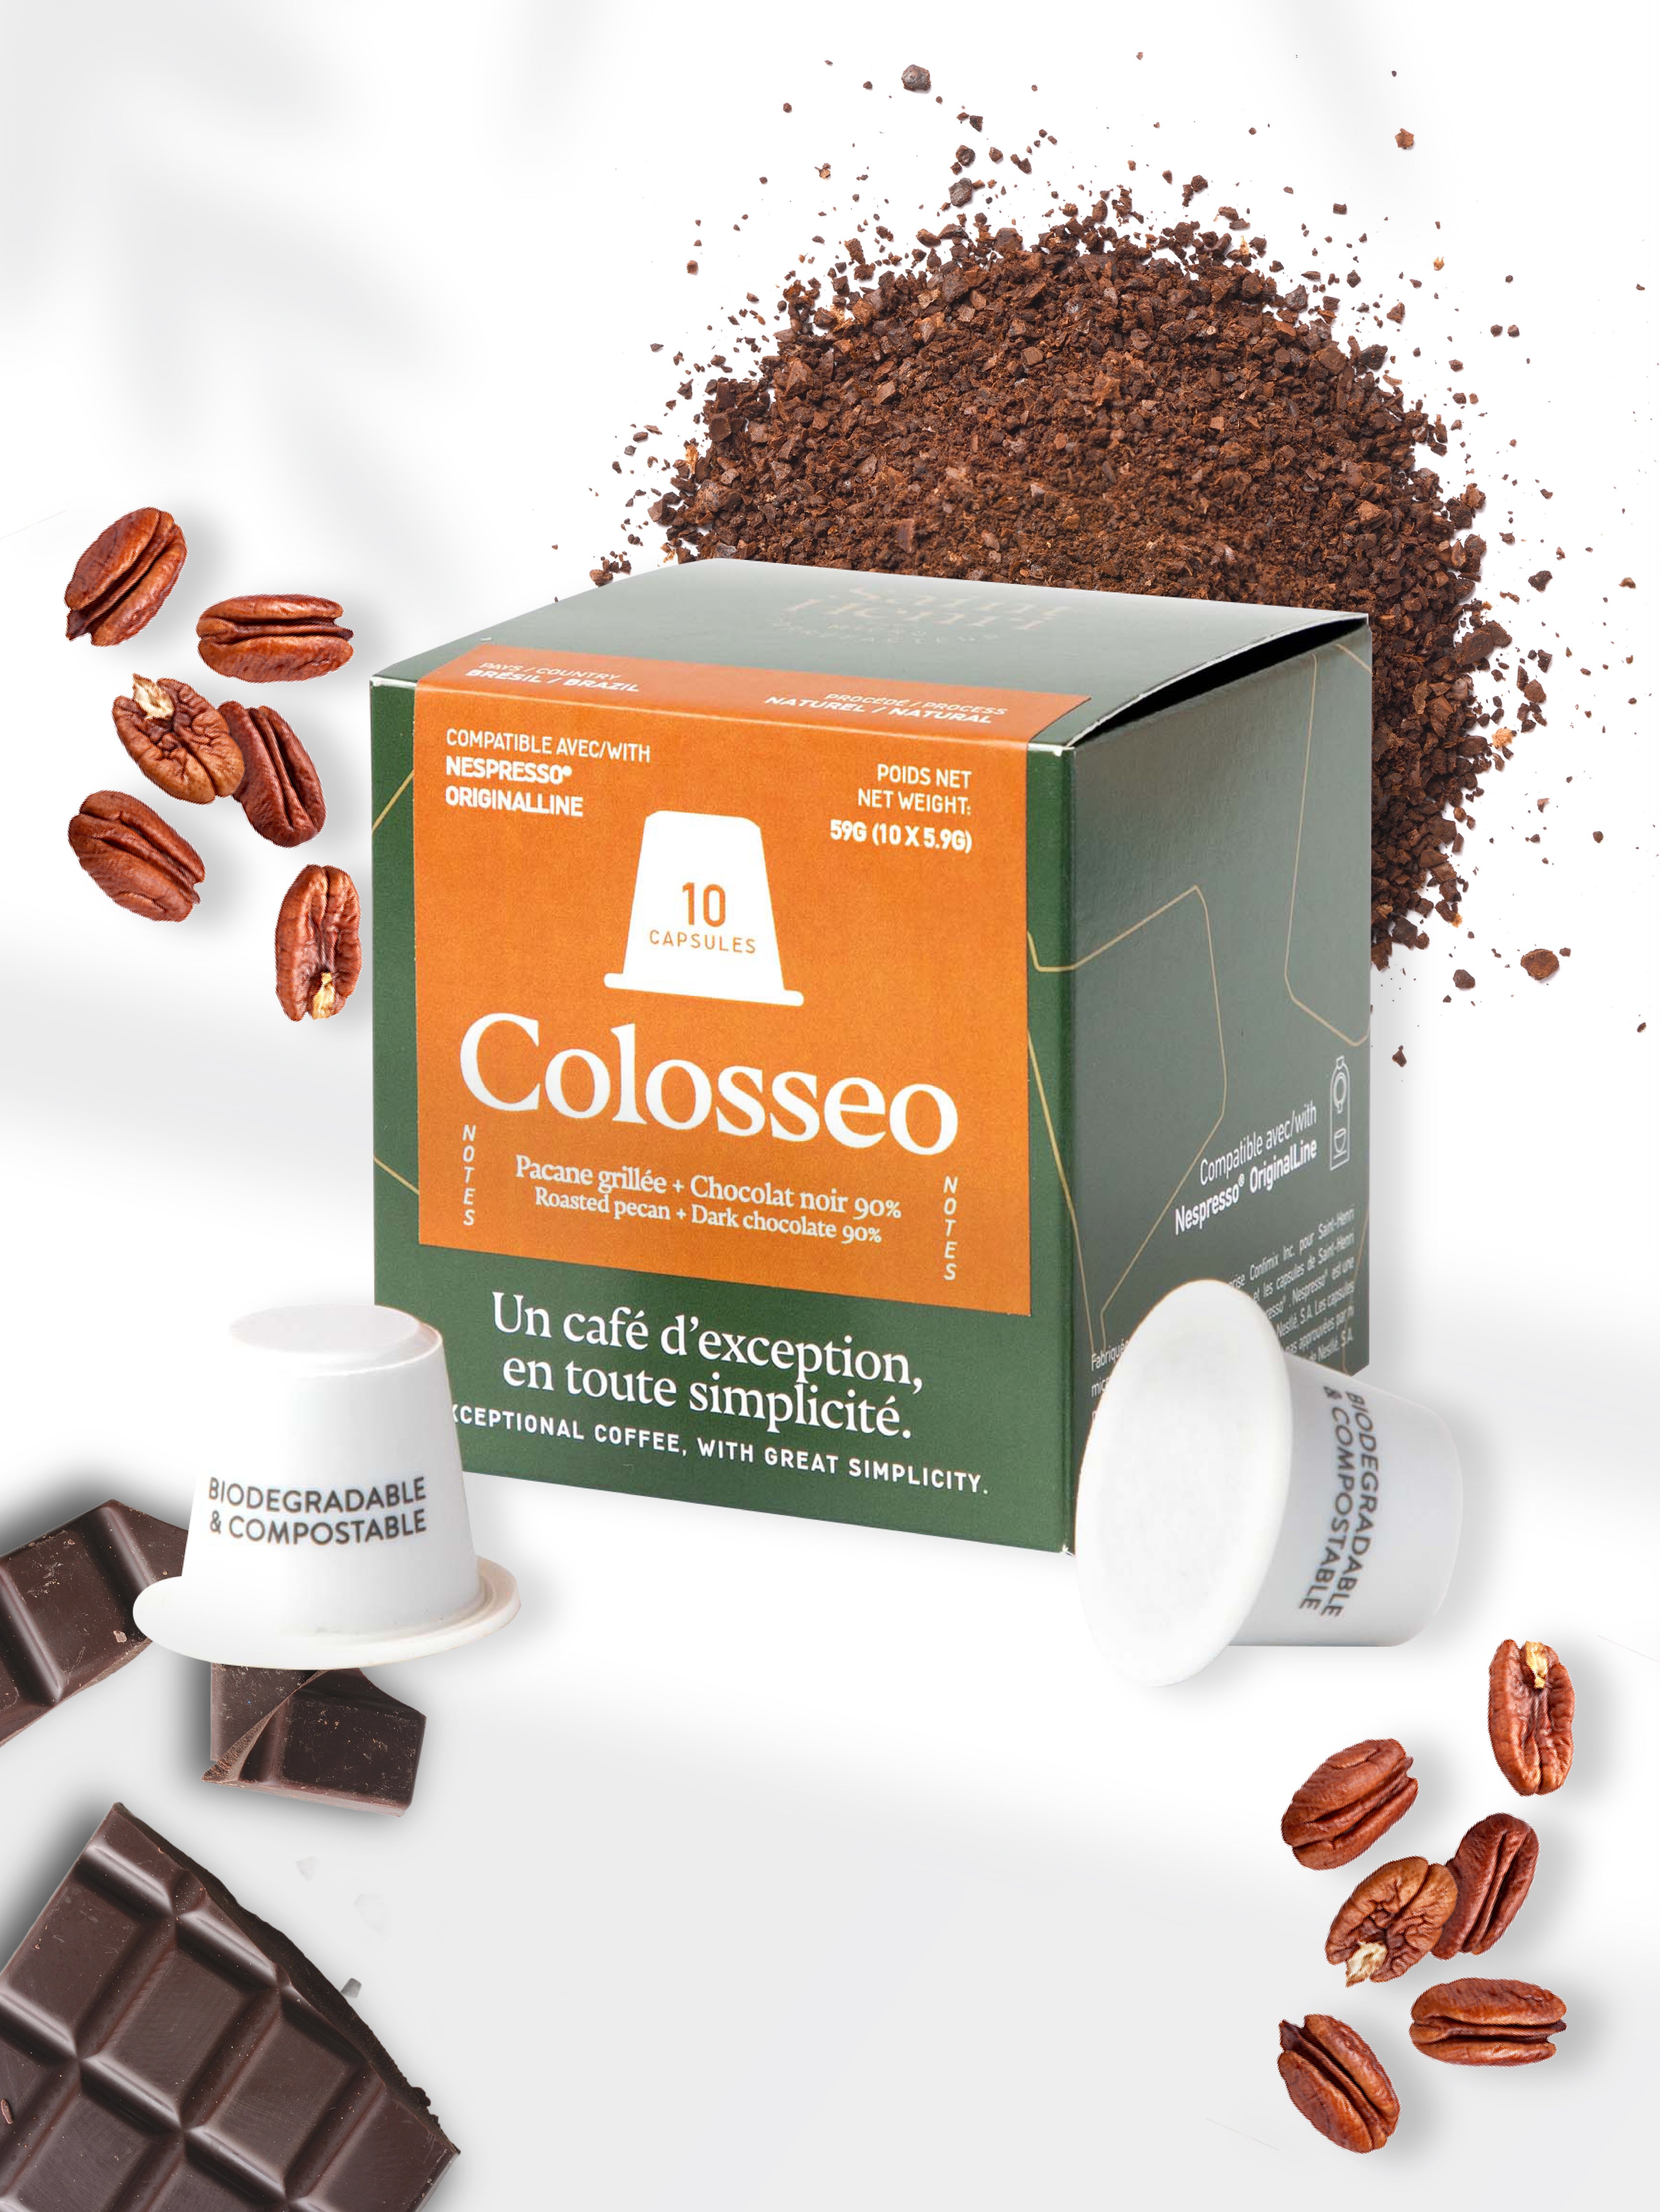 Colosseo capsules